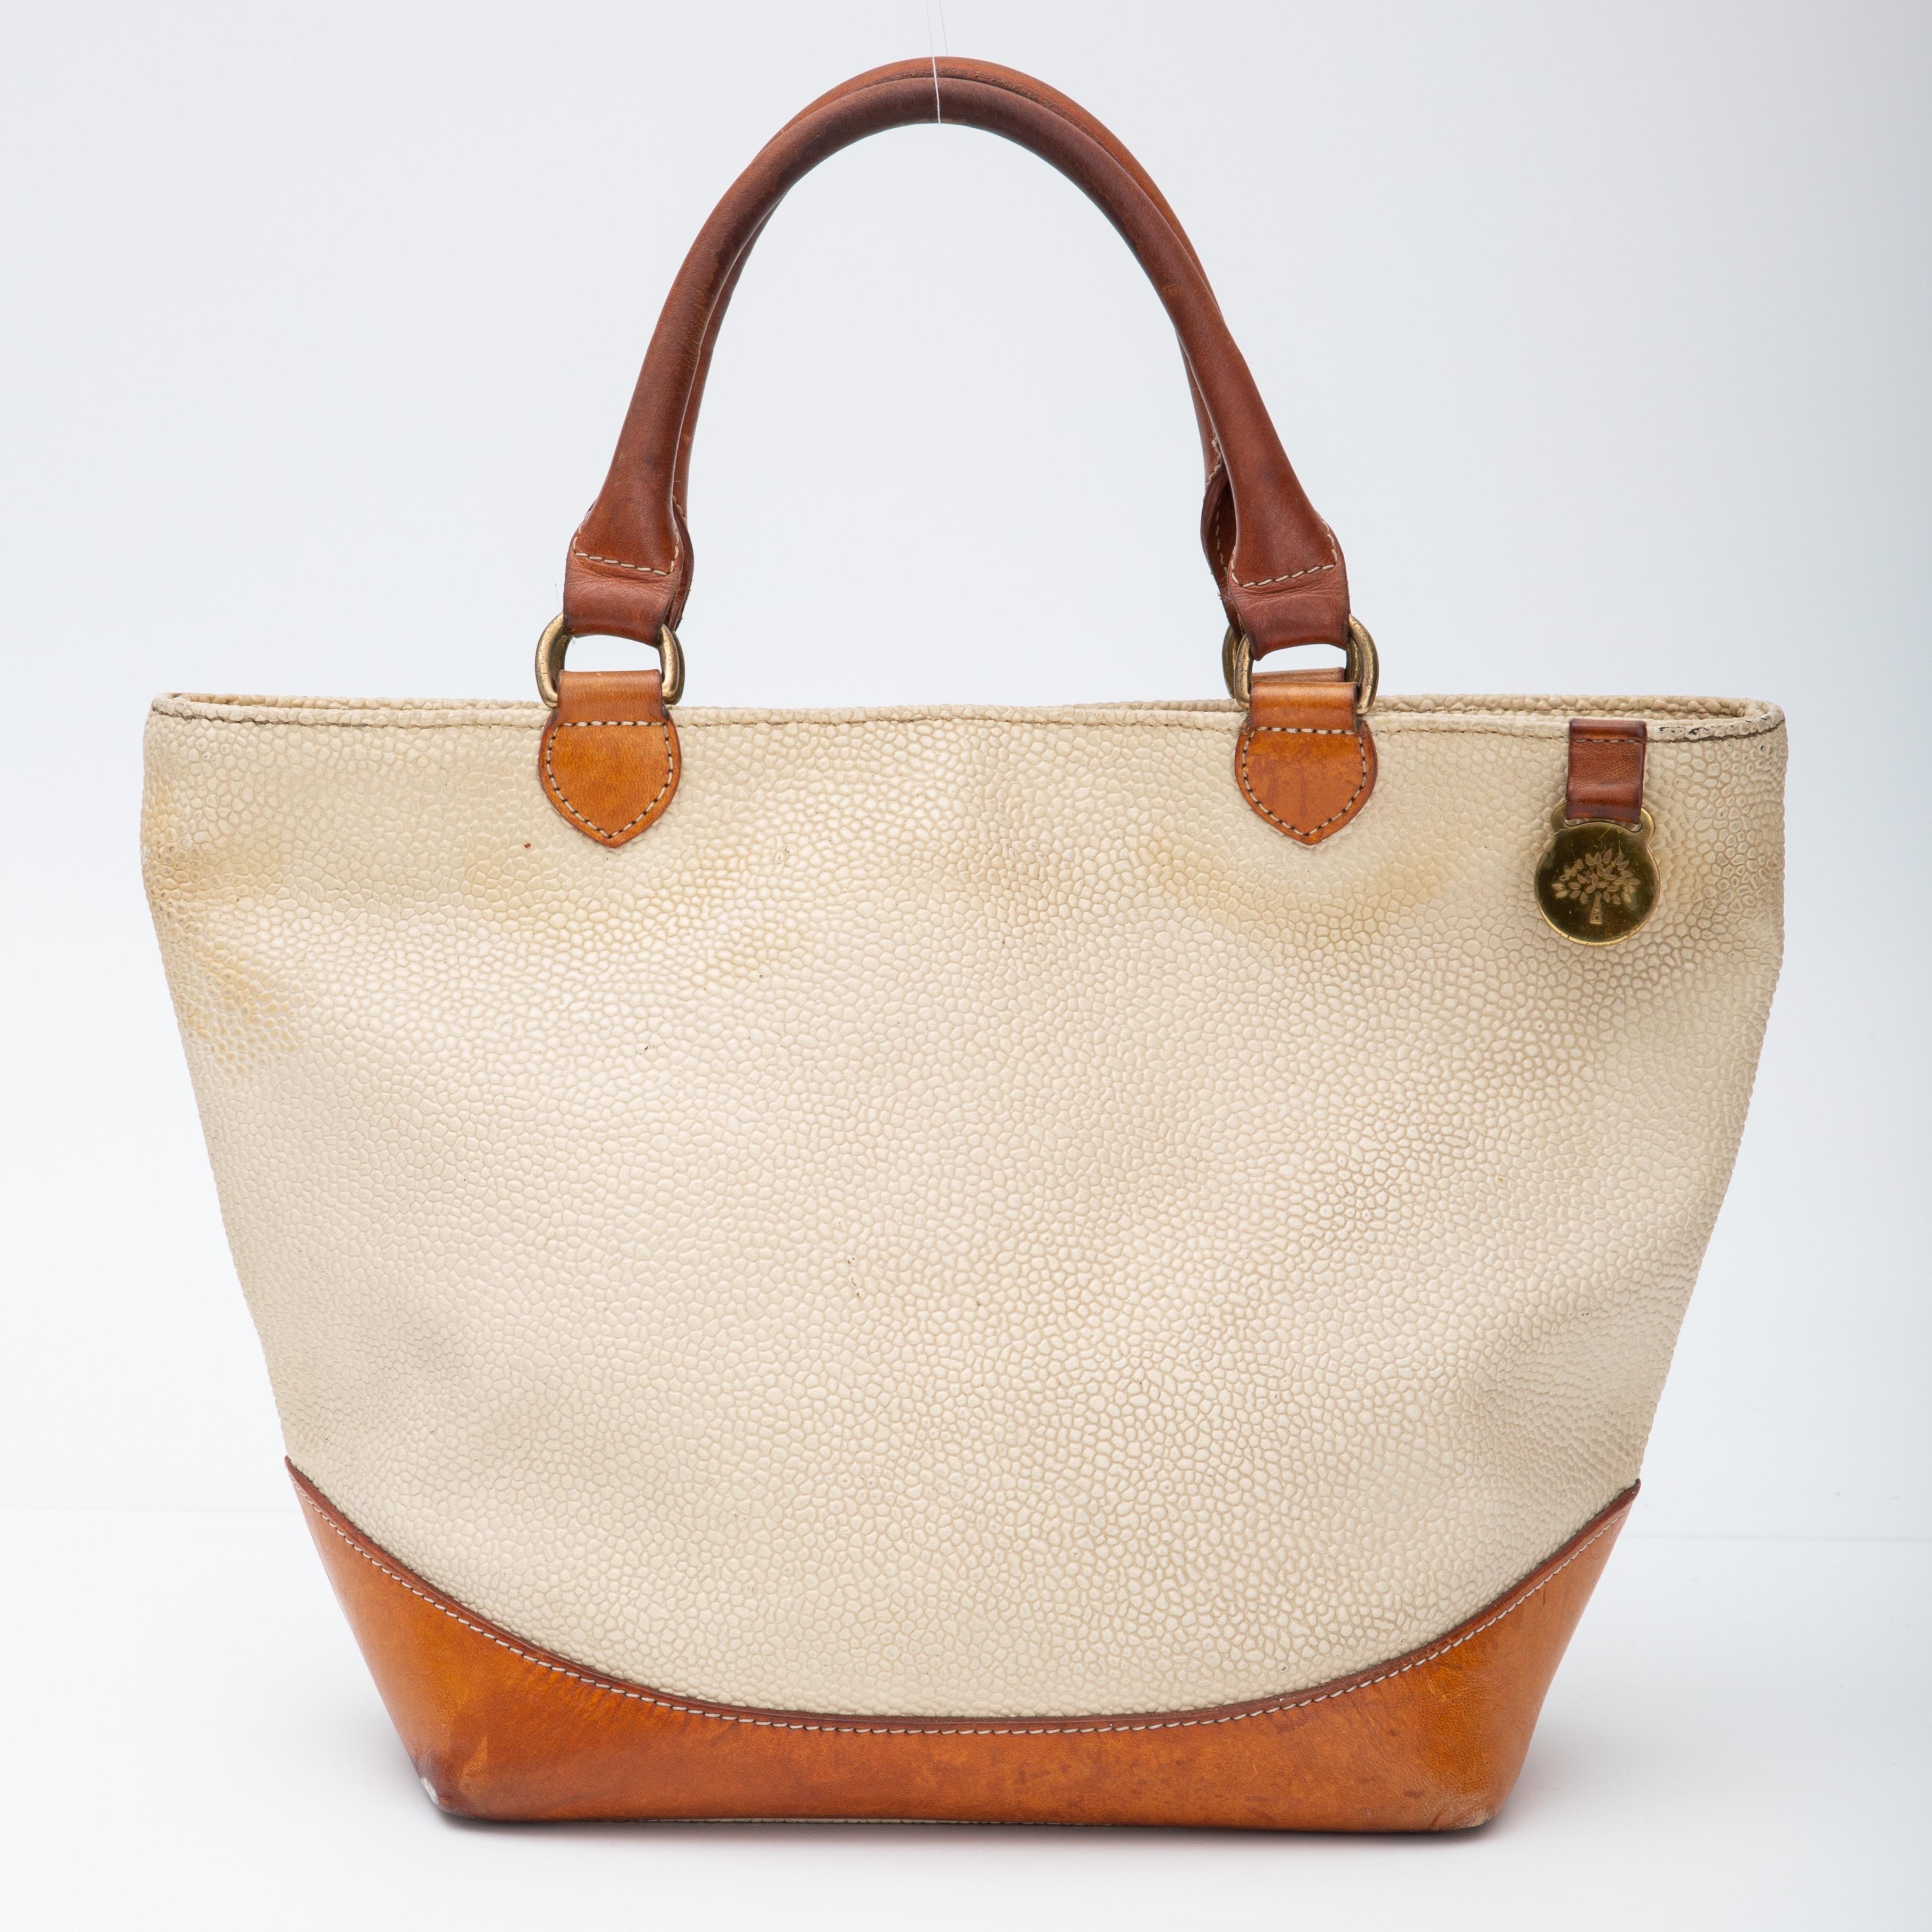 COLOR: Beige/cream
MATERIAL: Pebbled leather
MEASURES: H 5” x W 12” x D 5”
DROP: 5”
CONDITION: Good - vintage bag with imperfections throughout including darkened top handles, light marks and scratches.

Made in England